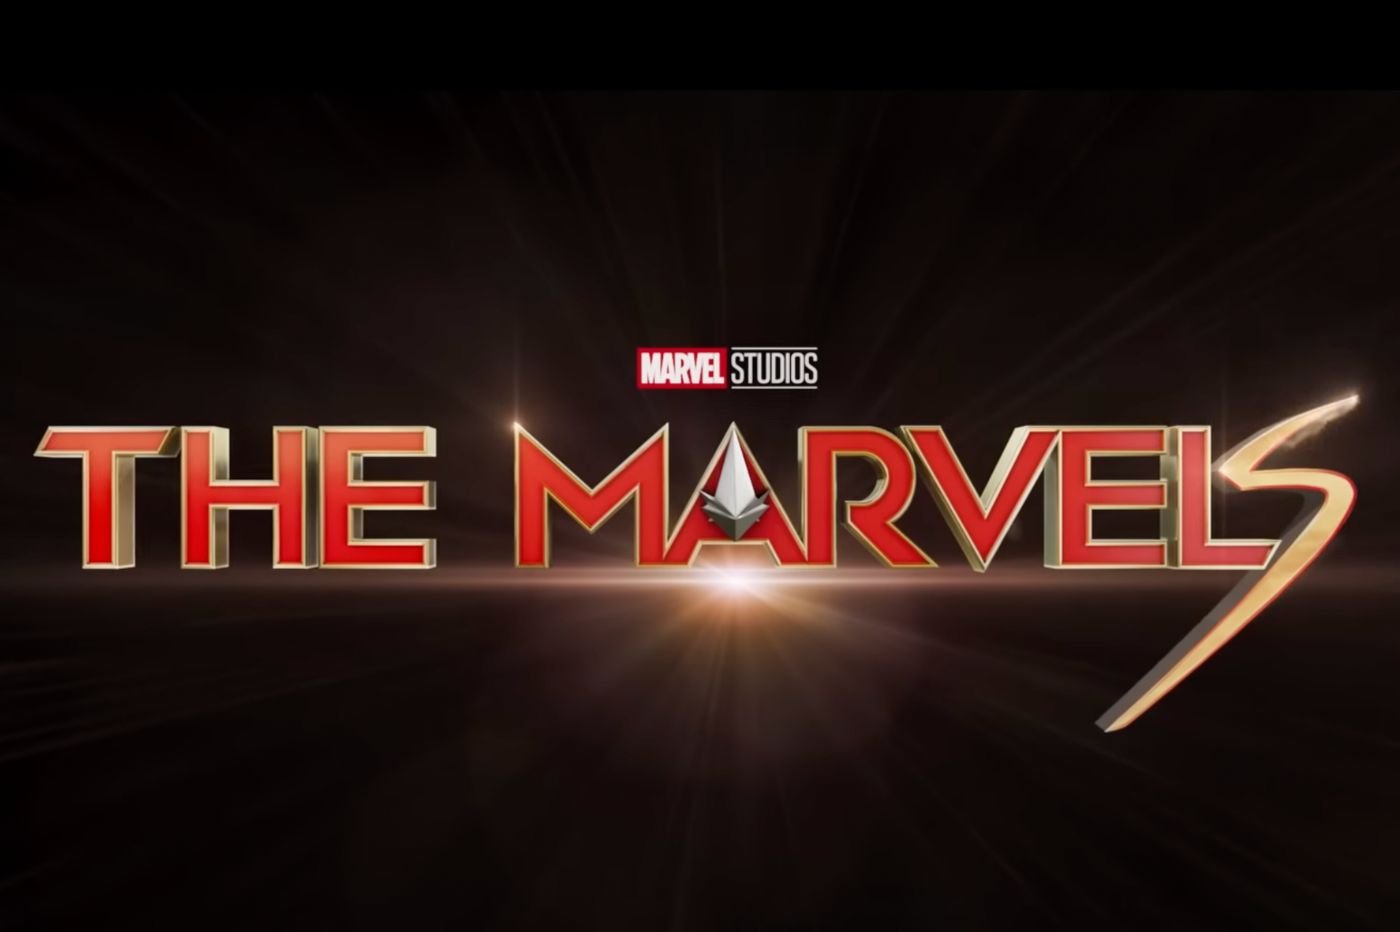 Everything you need to know about the new Marvel film